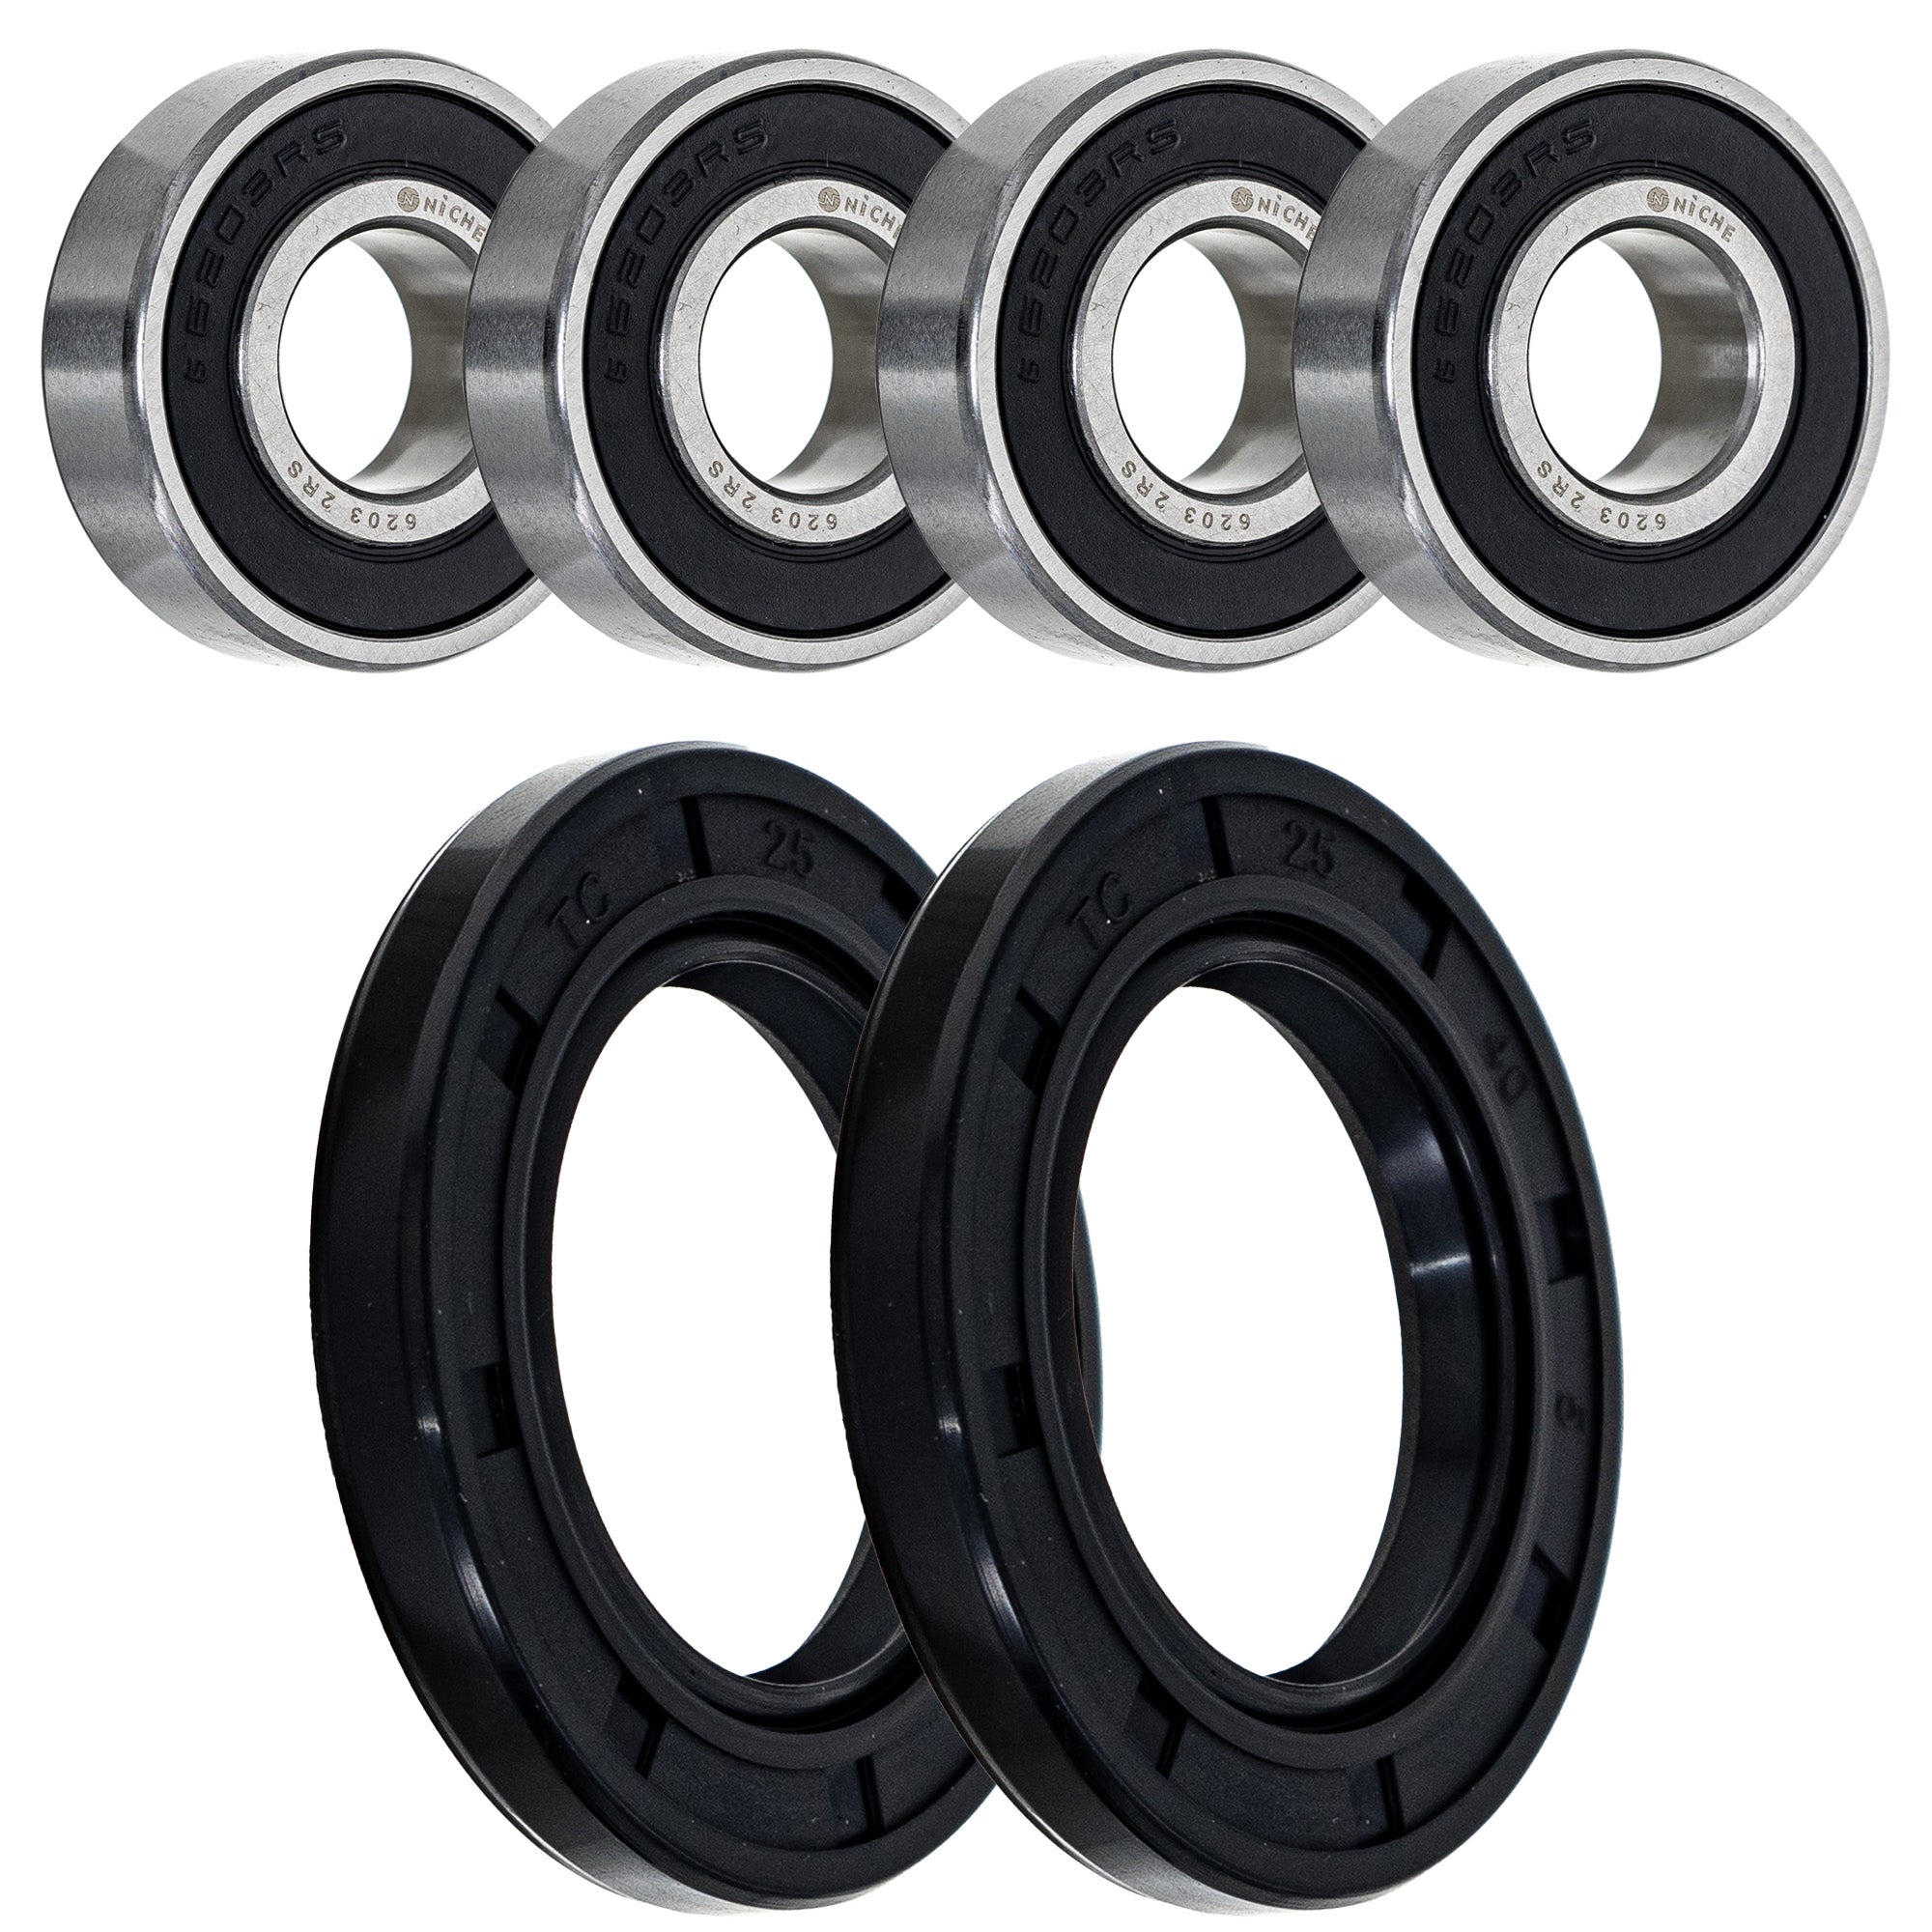 Wheel Bearing Seal Kit for zOTHER Ref No XSR900 XSR700 Tracer FZ8 NICHE MK1009200